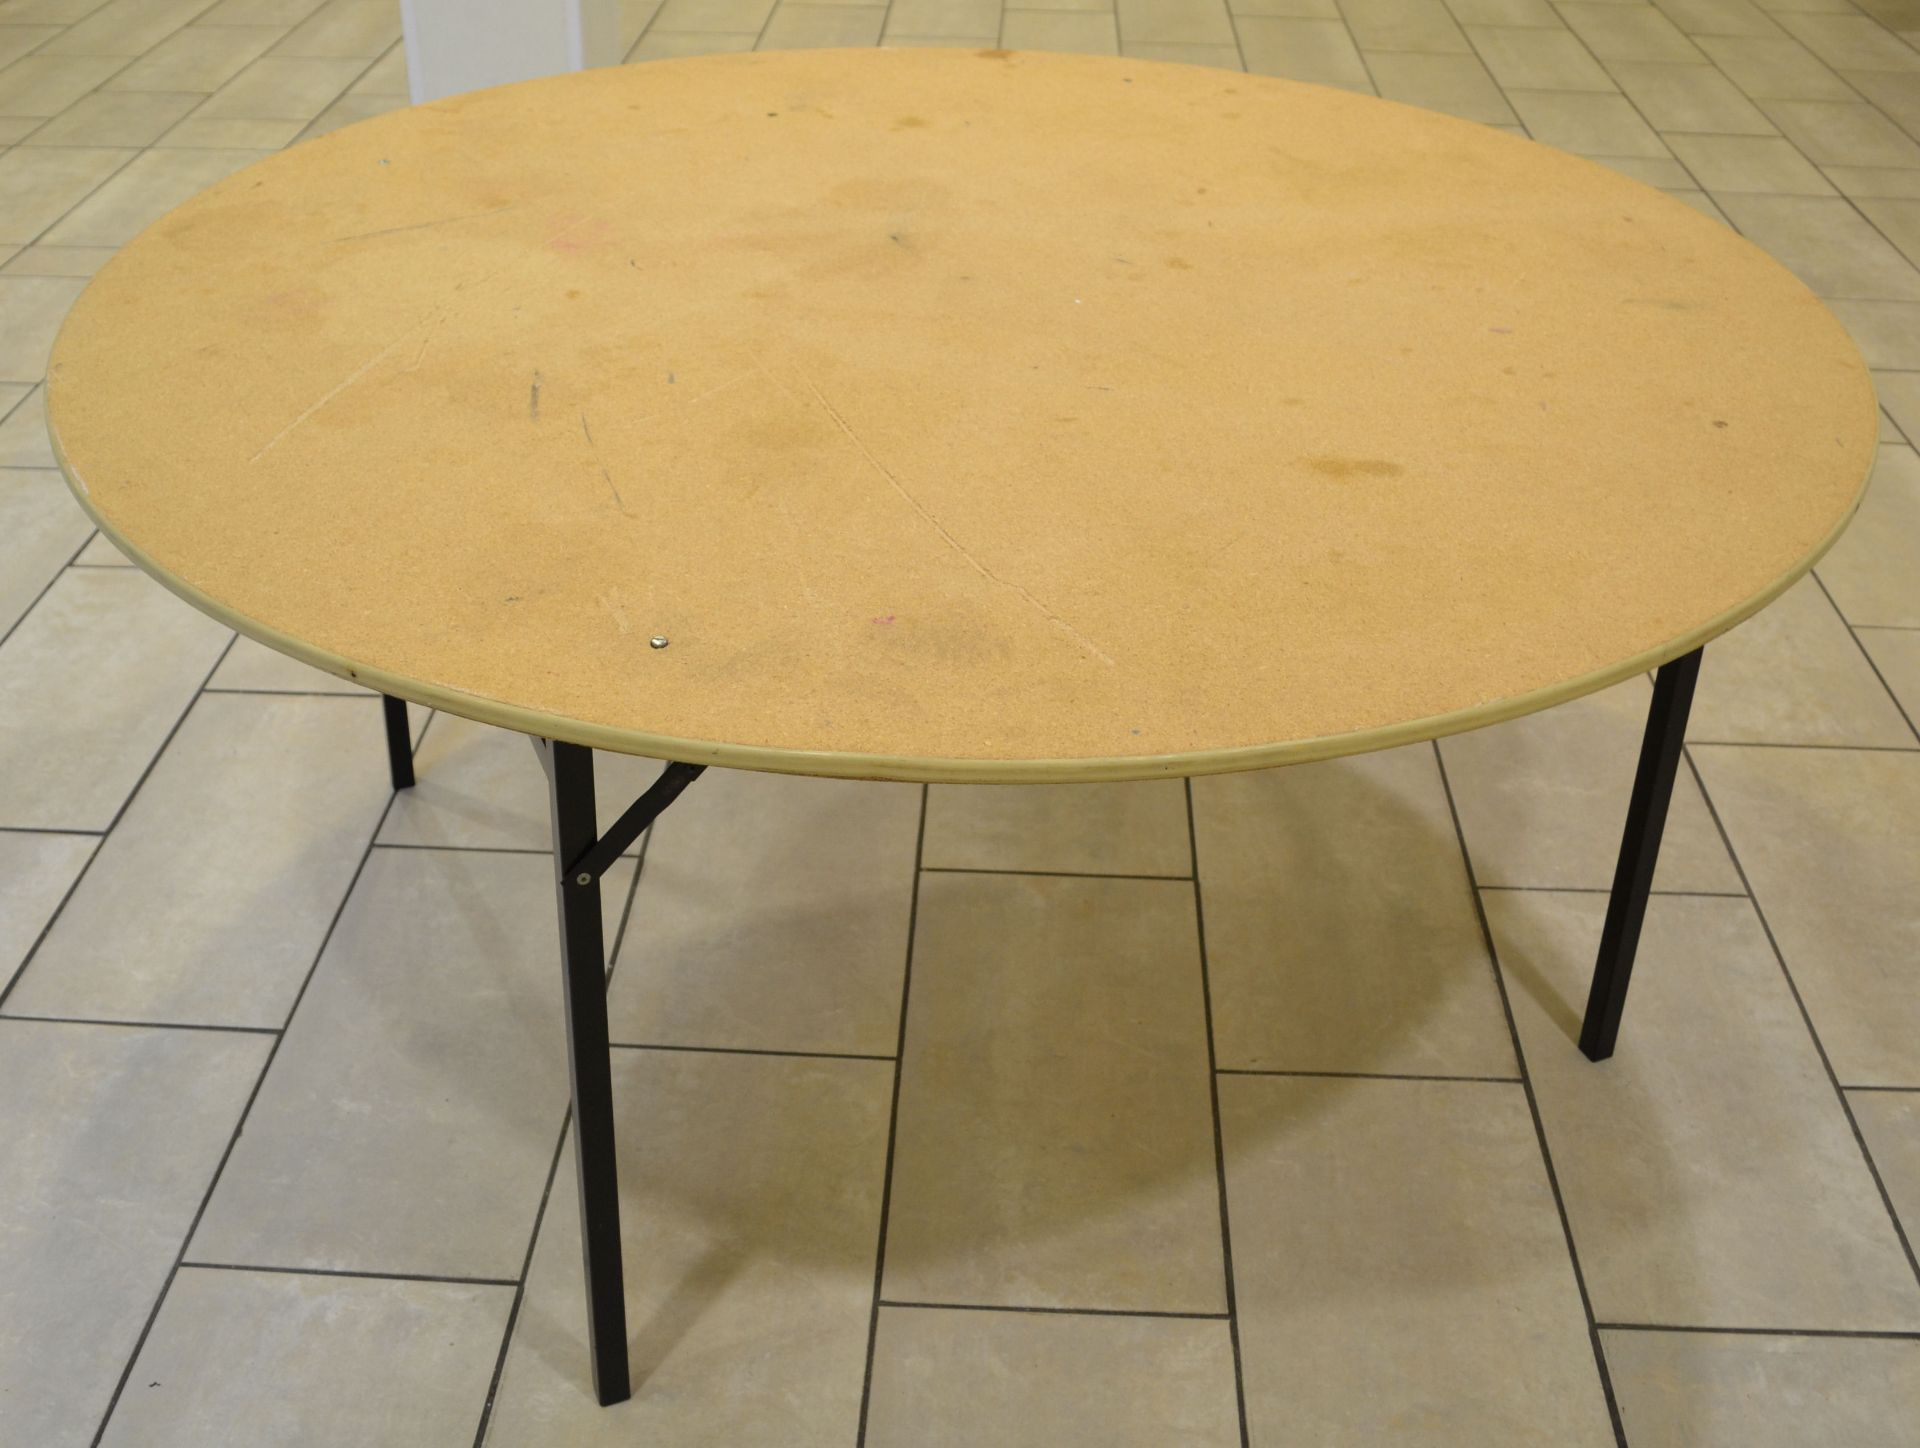 4 x 5 Foot Folding Round Banqueting Tables - CL152 - Location: Altrincham WA14 With a rubber-edged - Image 5 of 12